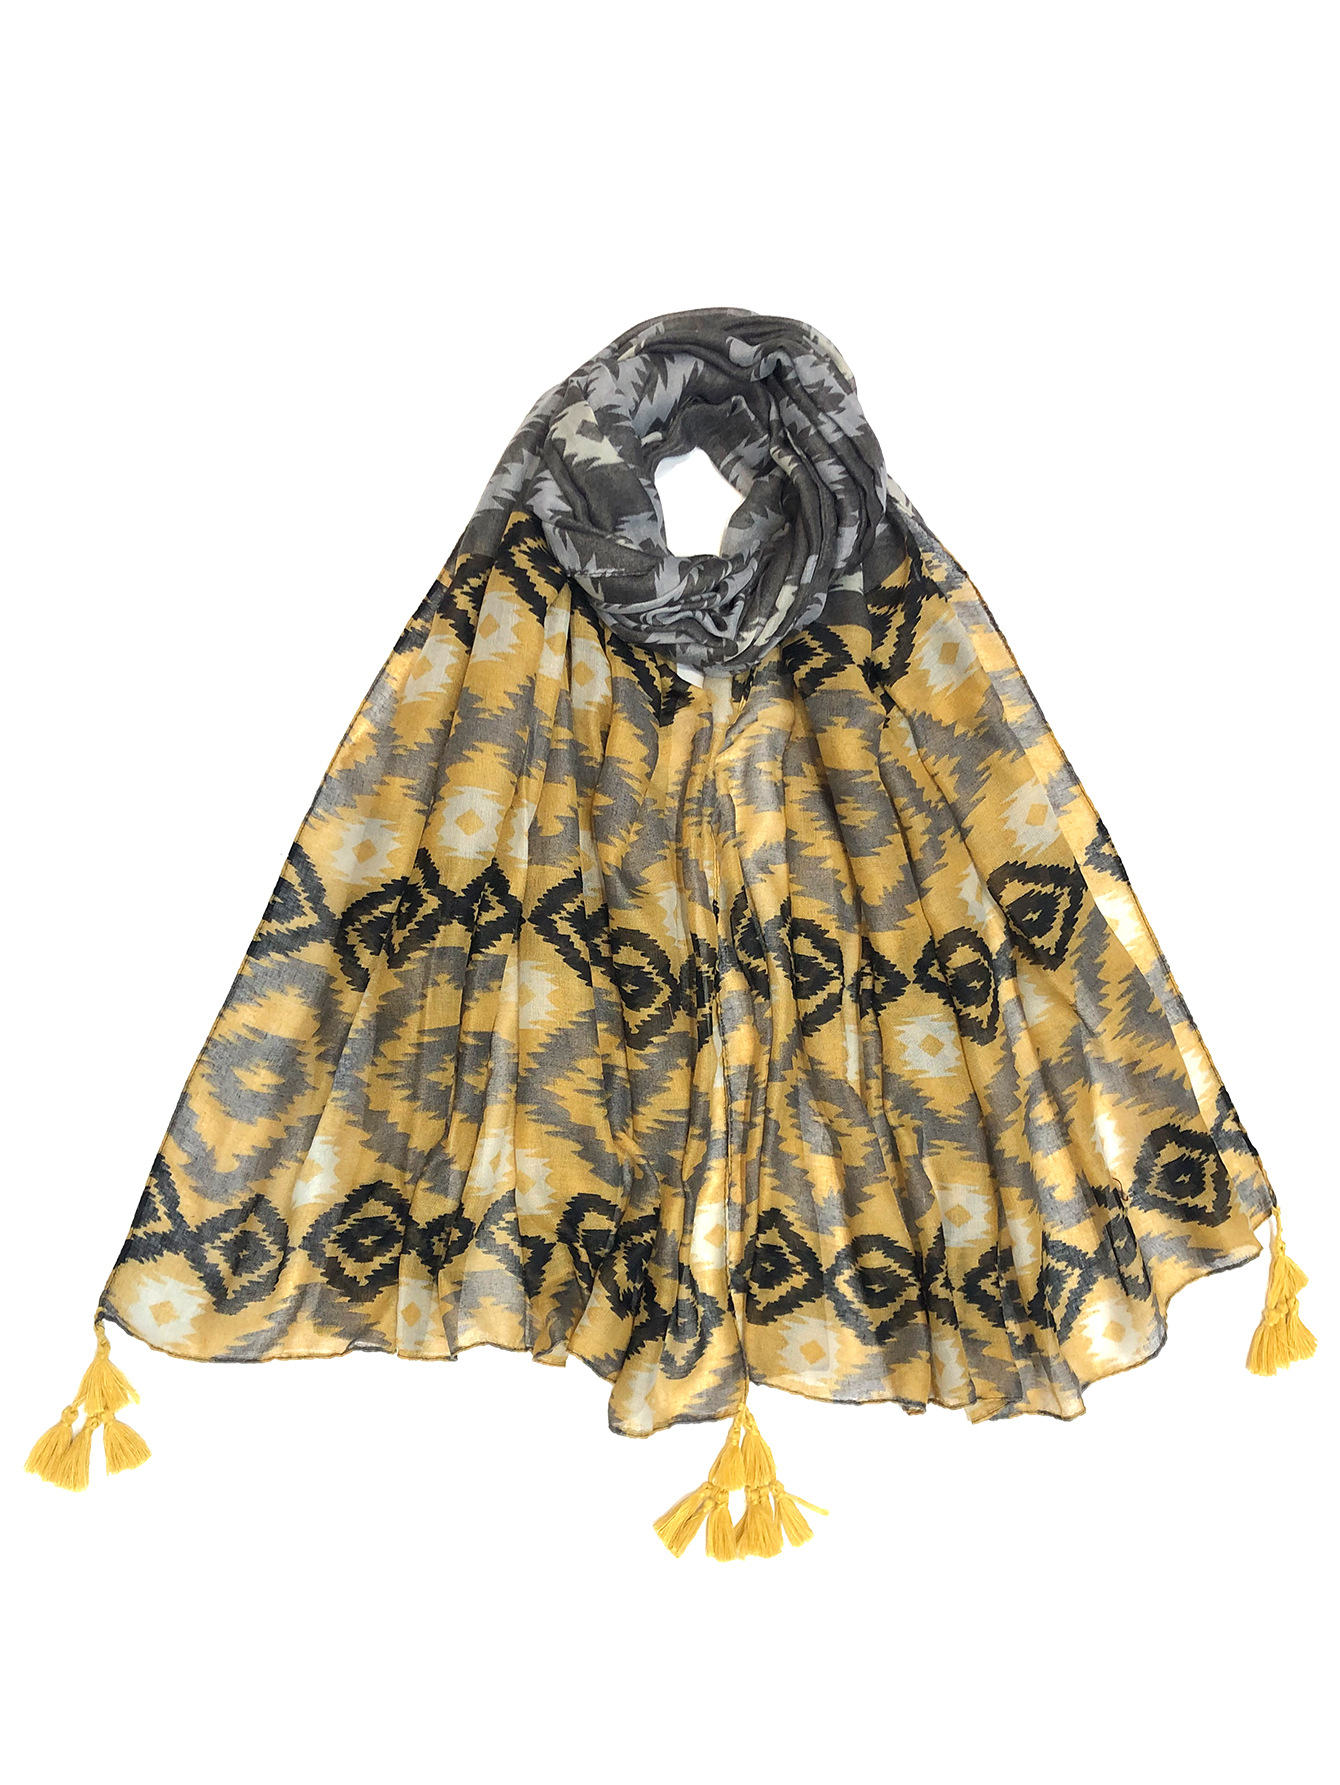 New European and American Export Spring and Summer Fashion Printing Tassel Scarf Shawl Exclusive for Cross-Border Factory Supply